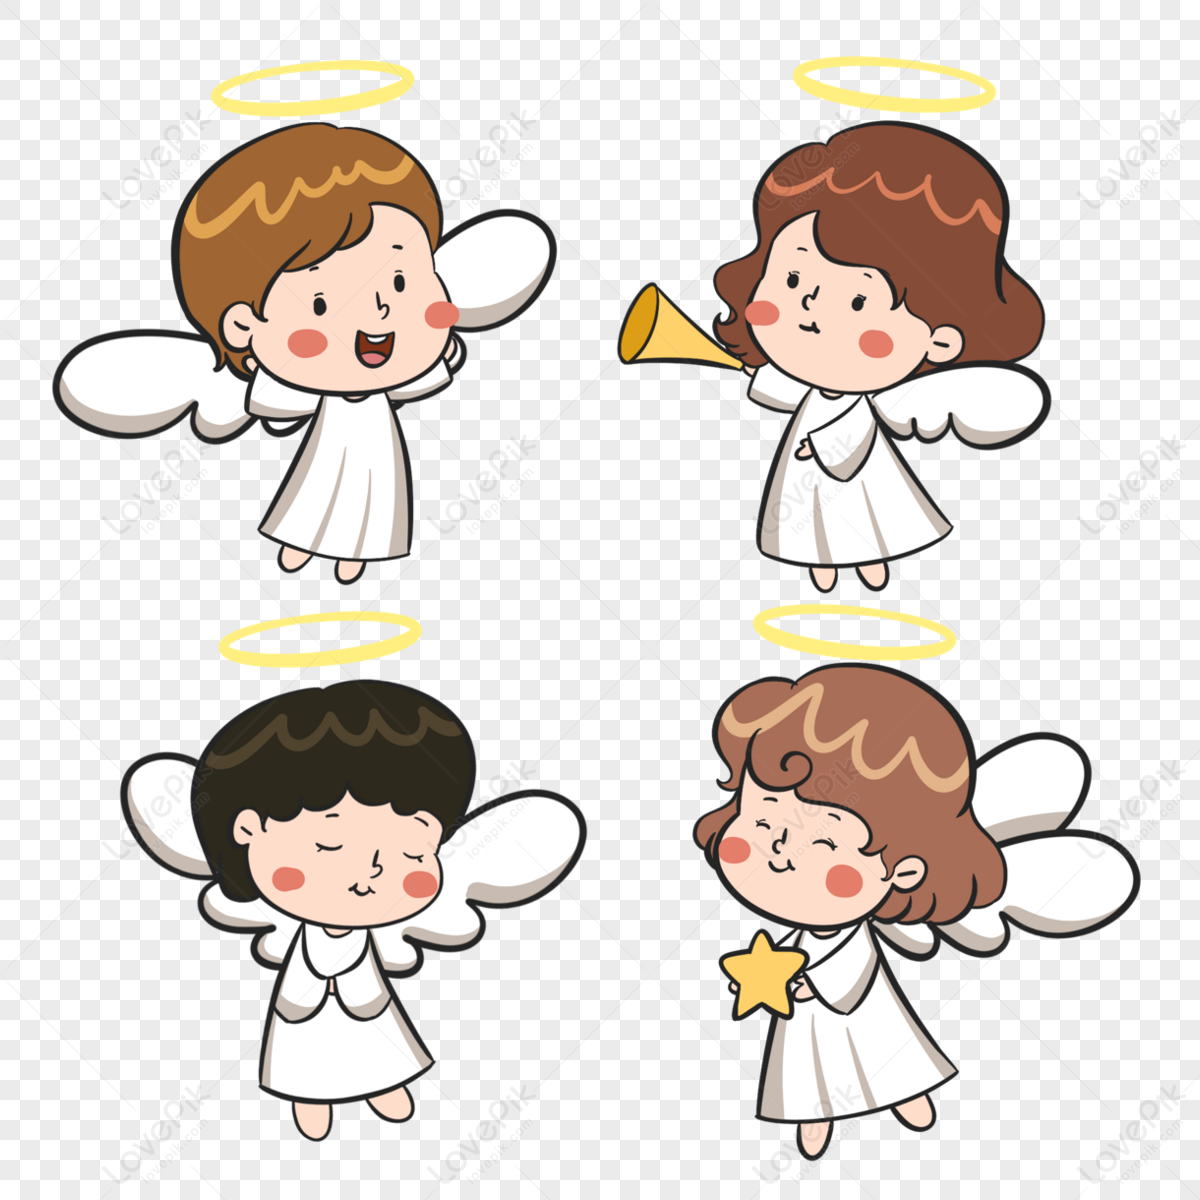 baby angel png